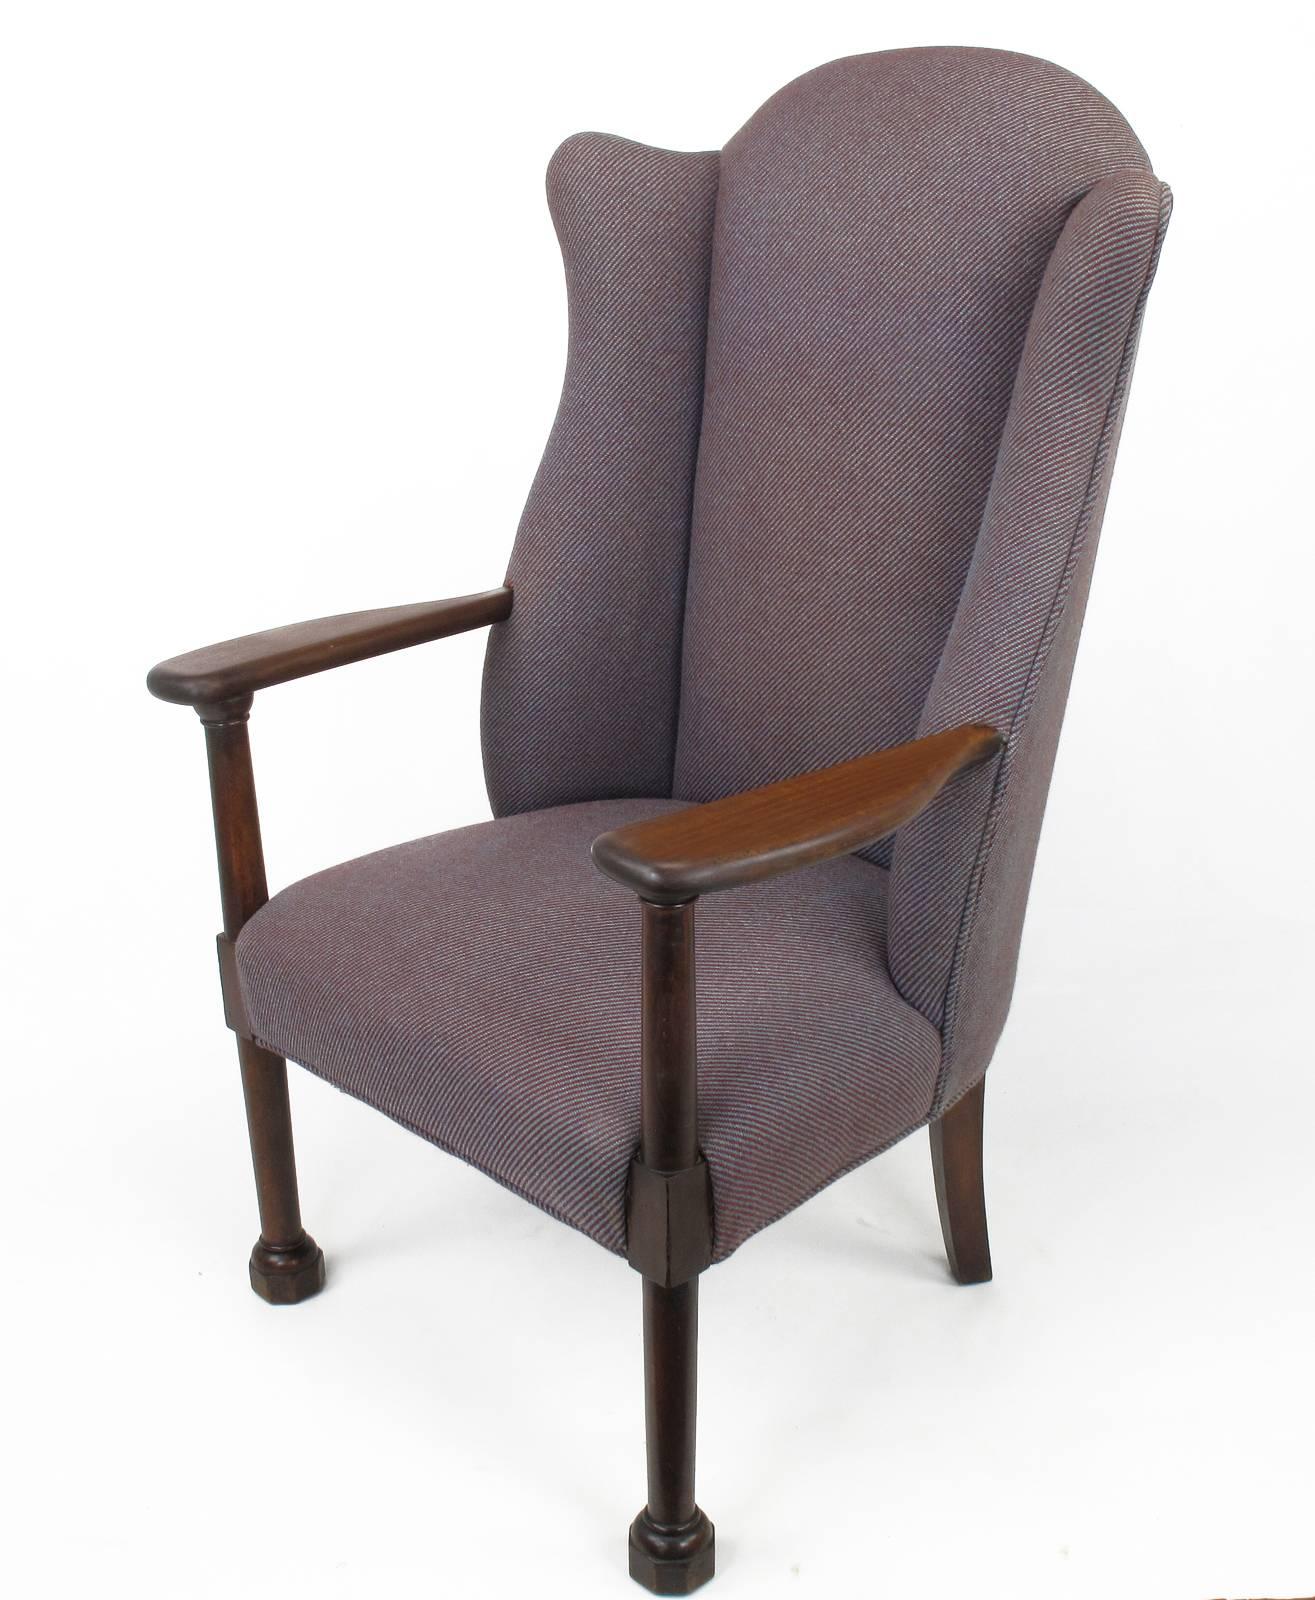 Late 1800s English arts and crafts wingback chair. Mahogany frame with slab open arms, octagonal plinth feet and large dowel style arms and legs. Older striped periwinkle and magenta wool upholstery in good condition.